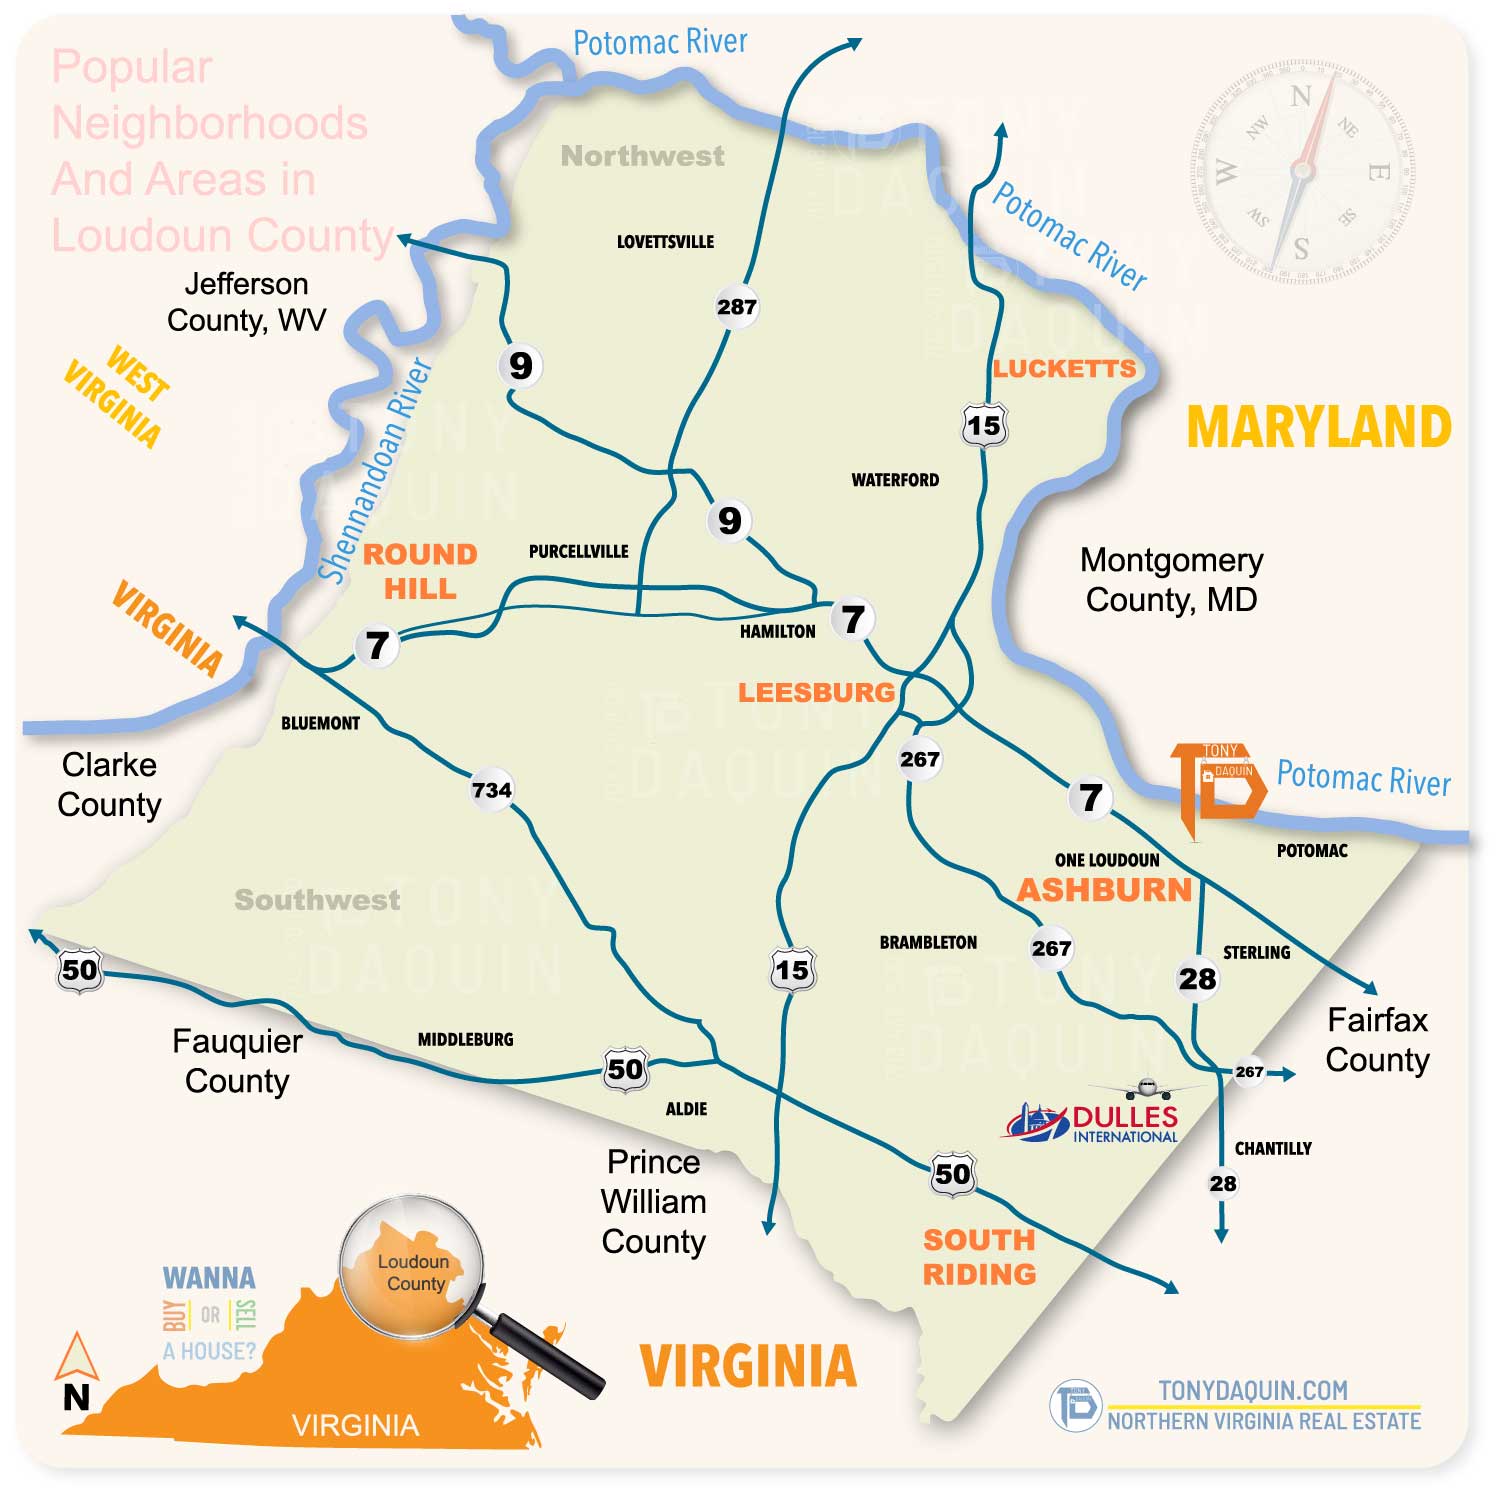 Homebuyer Map of Loudoun County VA with the Washington & Old Dominion Trail (W&OD). 72 miles of trails through the Northern Virginia Counties